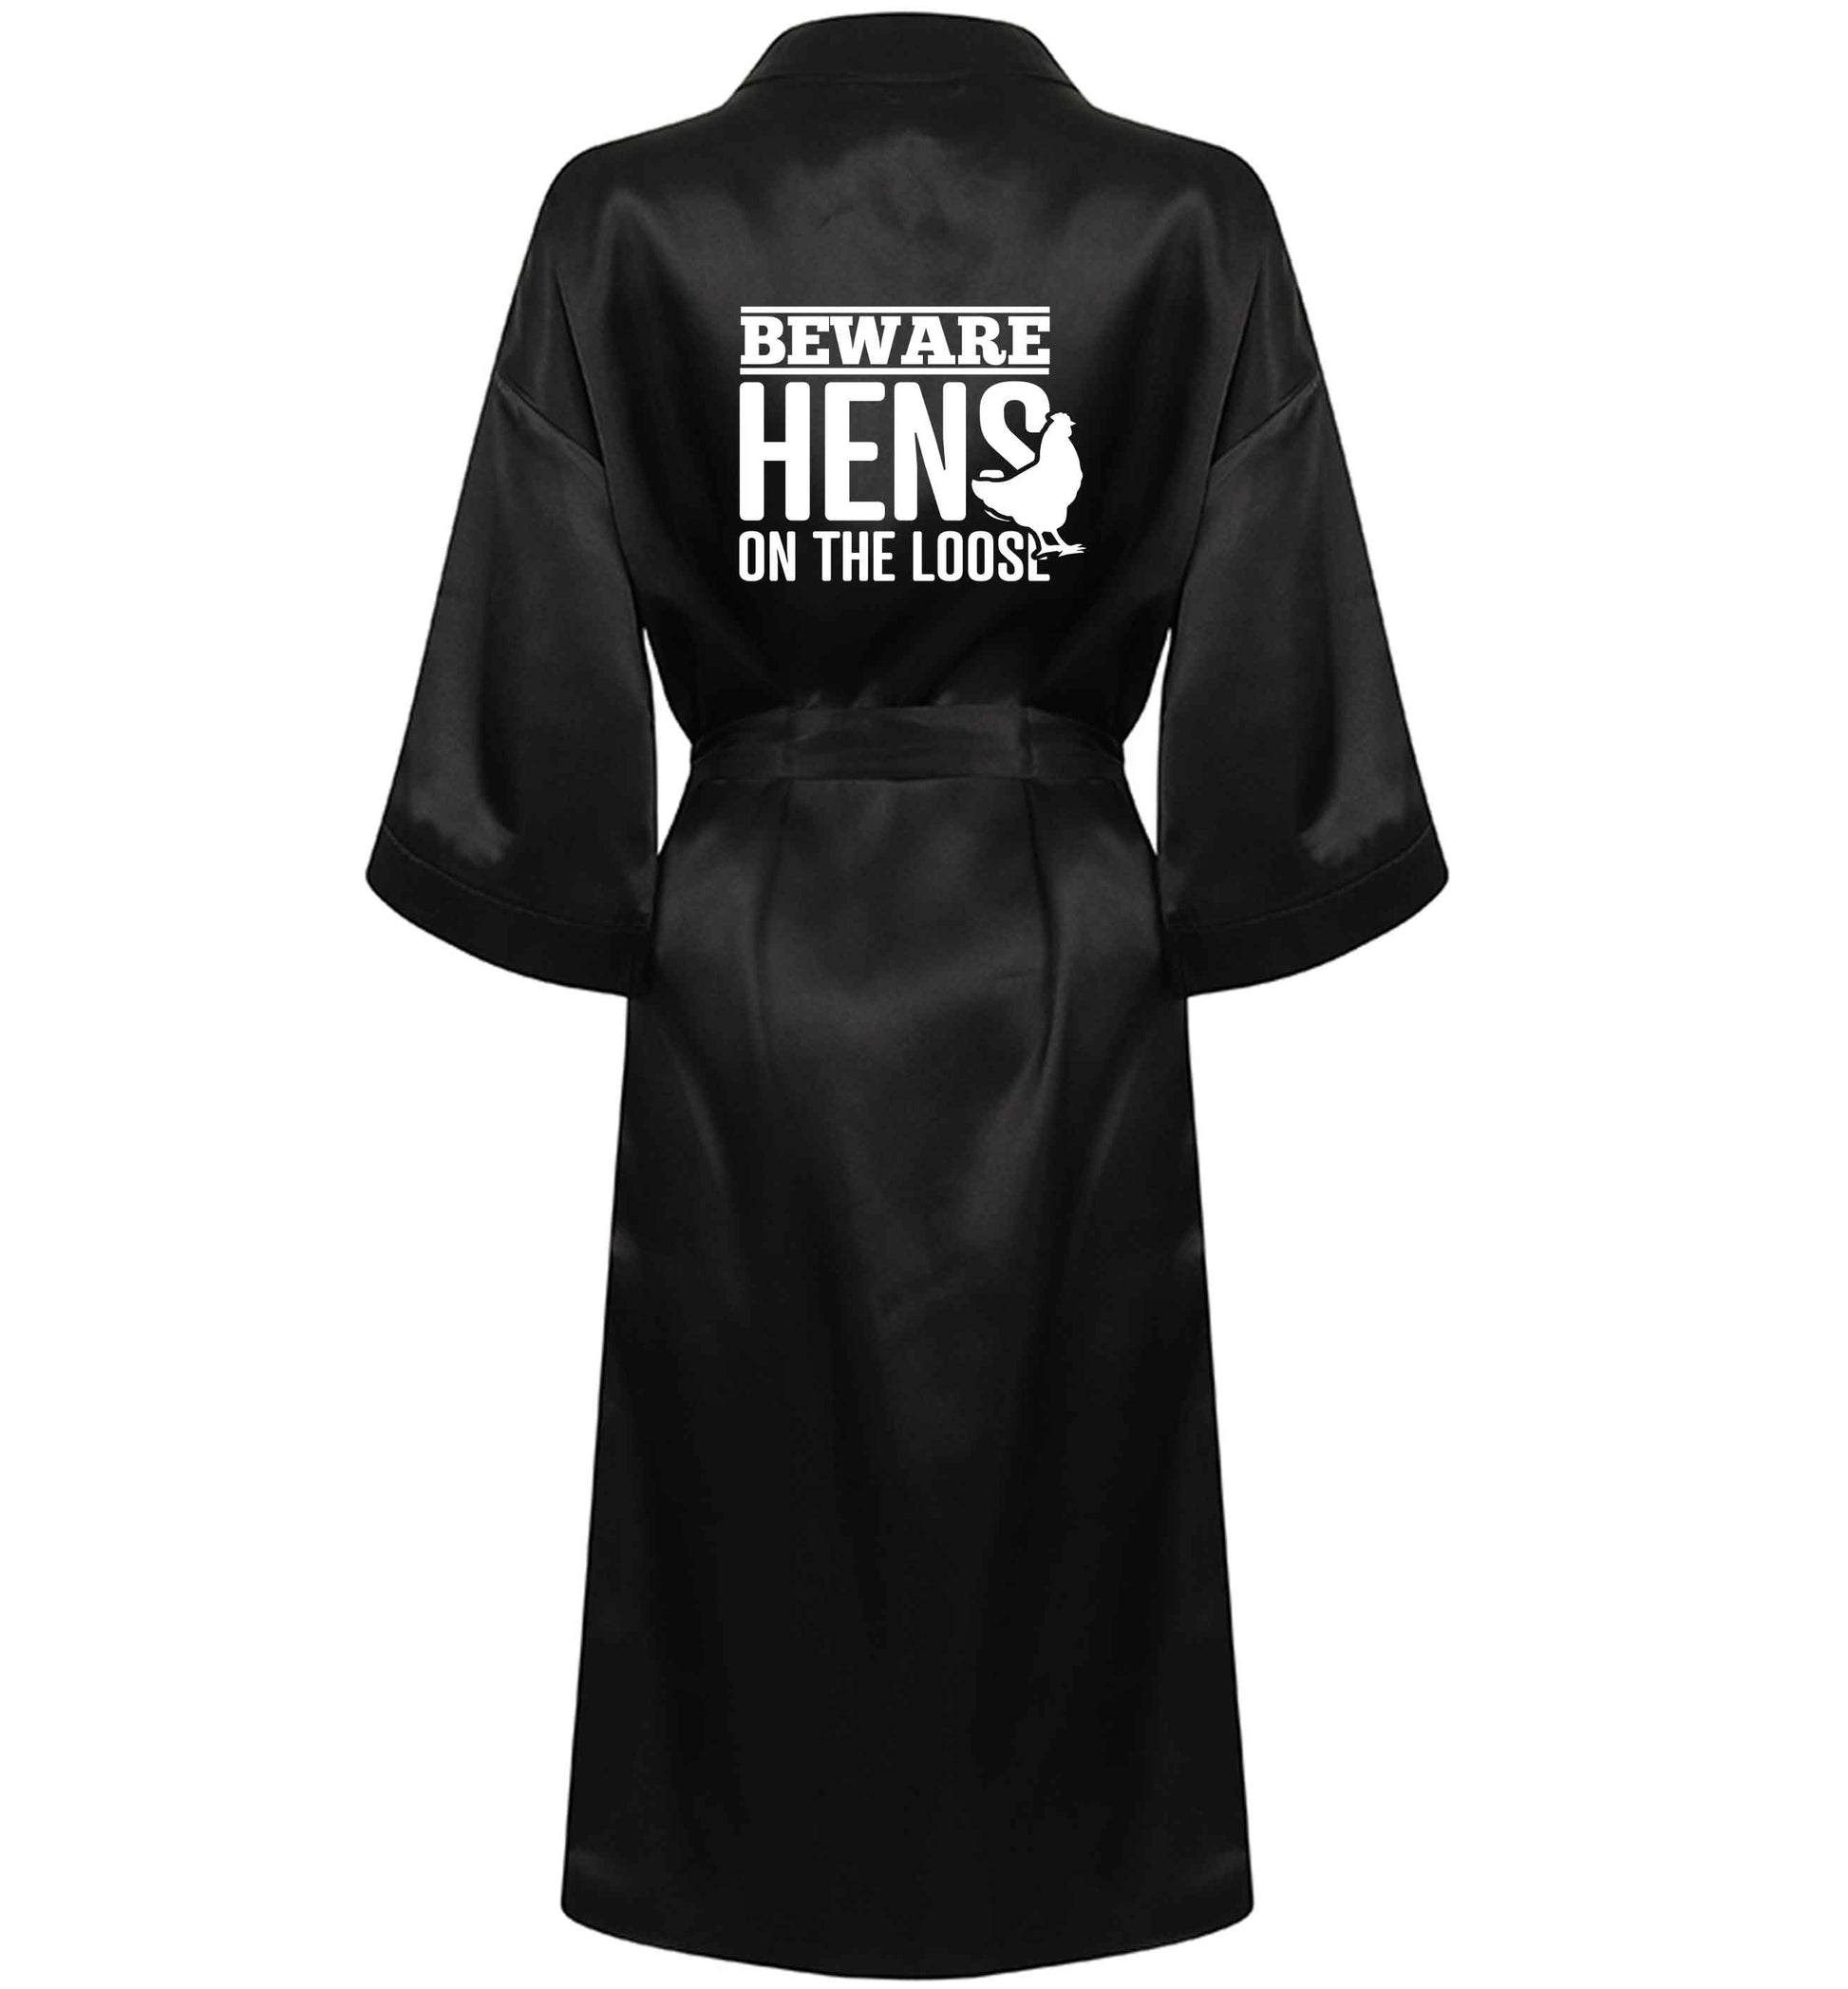 Beware hens on the loose XL/XXL black ladies dressing  gown size 16/18